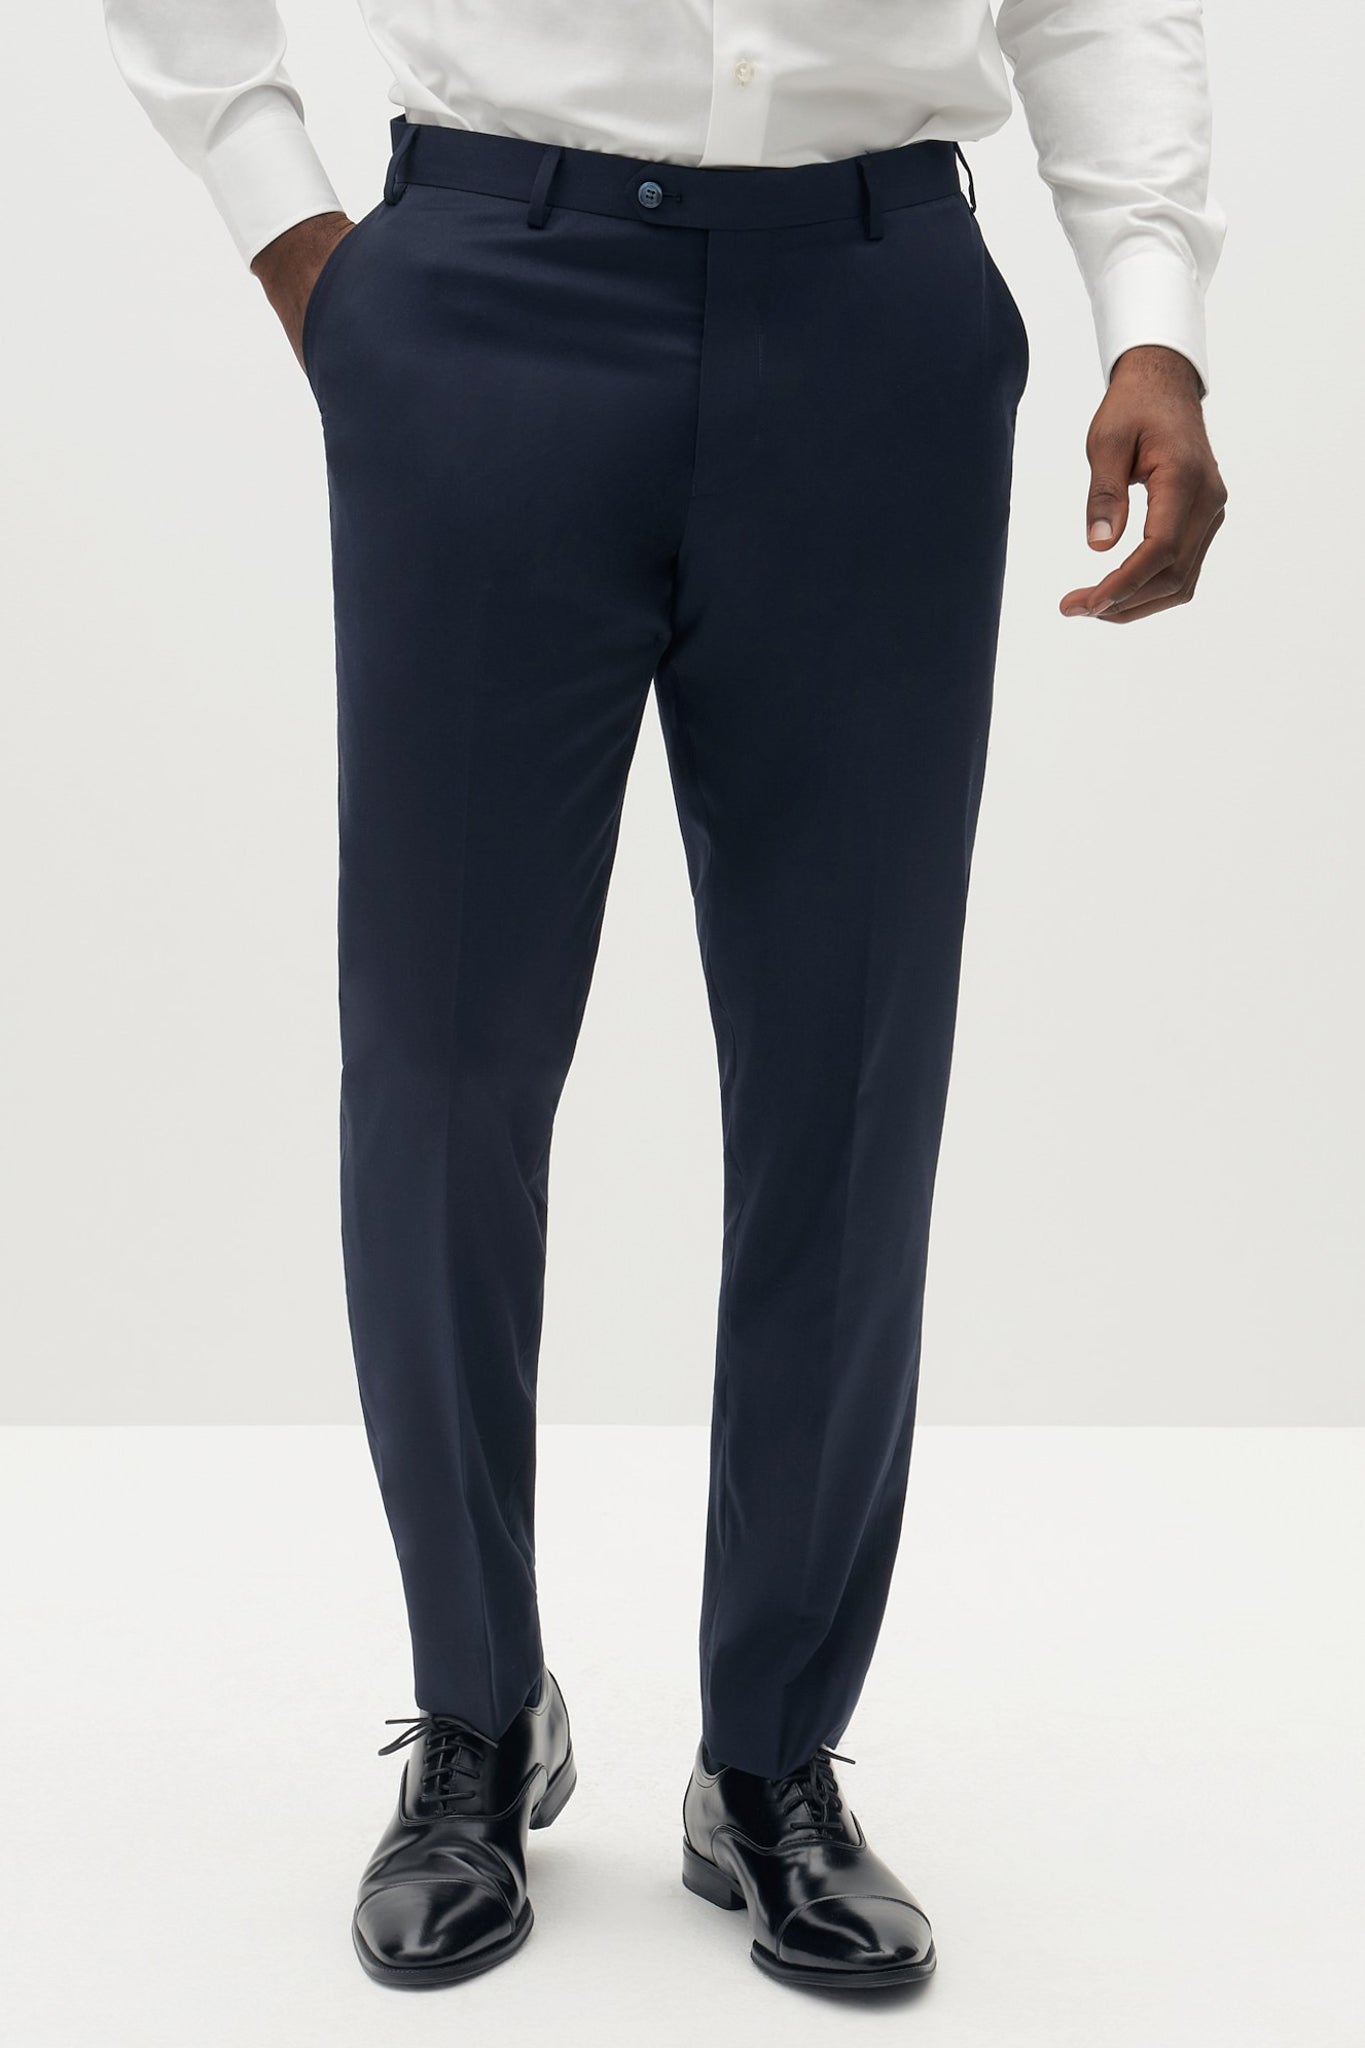 Buy Navy Blue Slim Fit Striped Pants by GentWithcom with Free Shipping